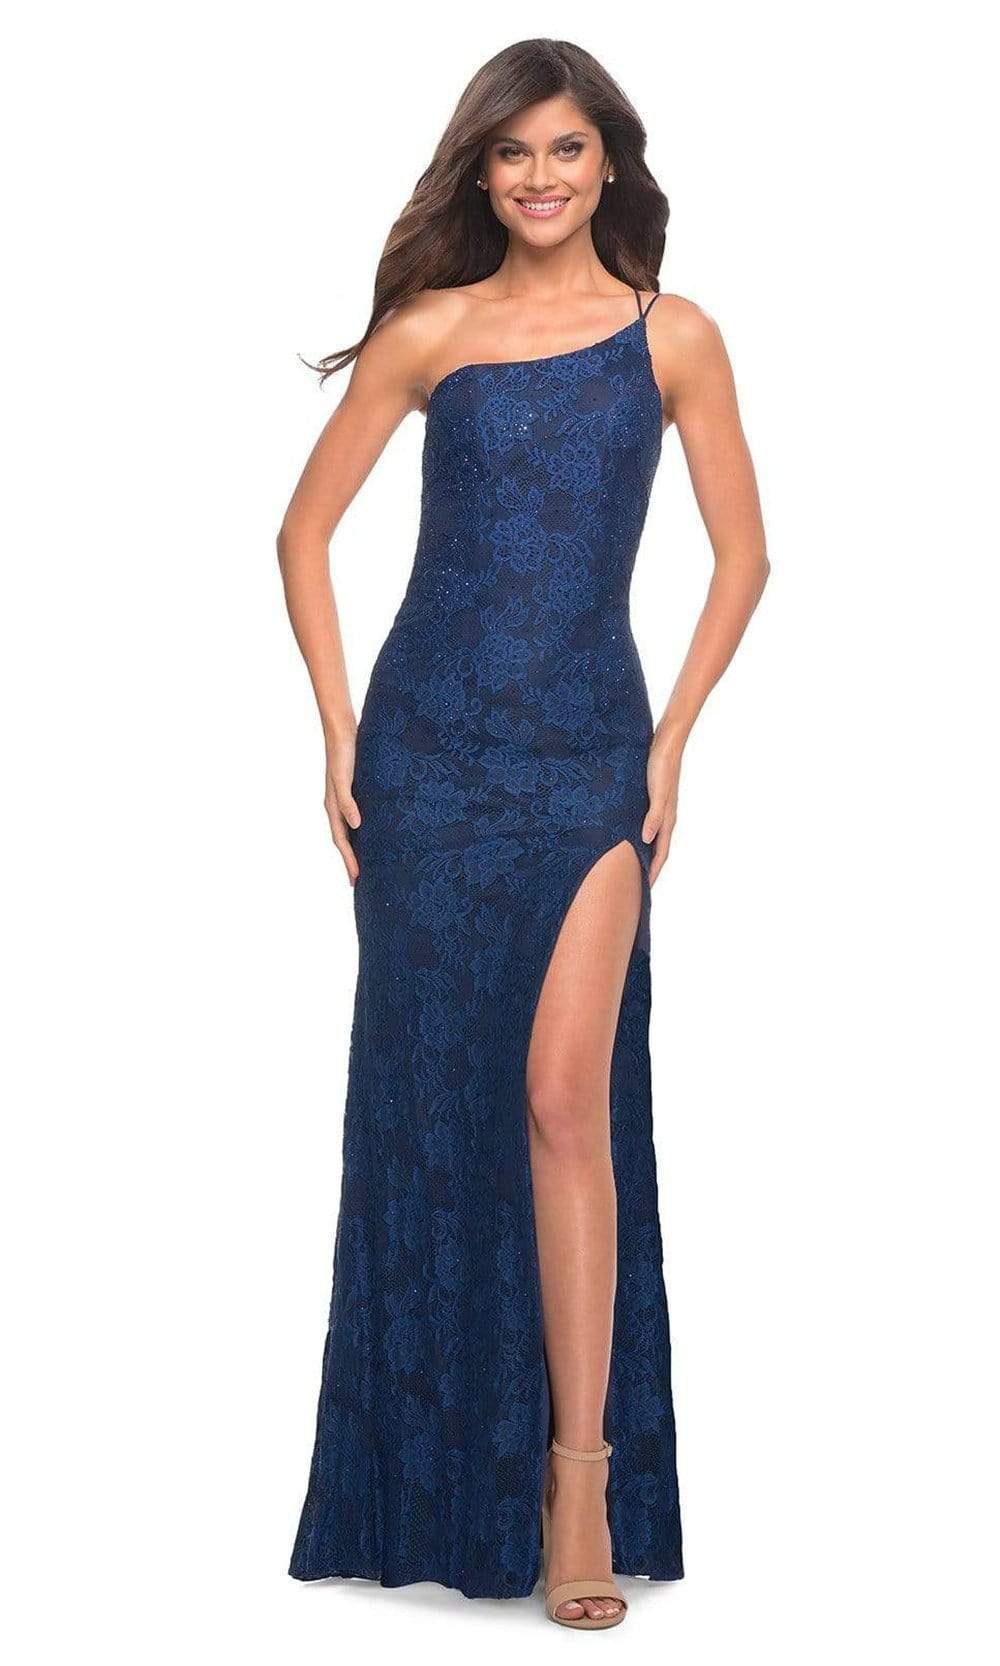 La Femme - 30441 Strappy Back Lace Gown Special Occasion Dress 00 / Navy